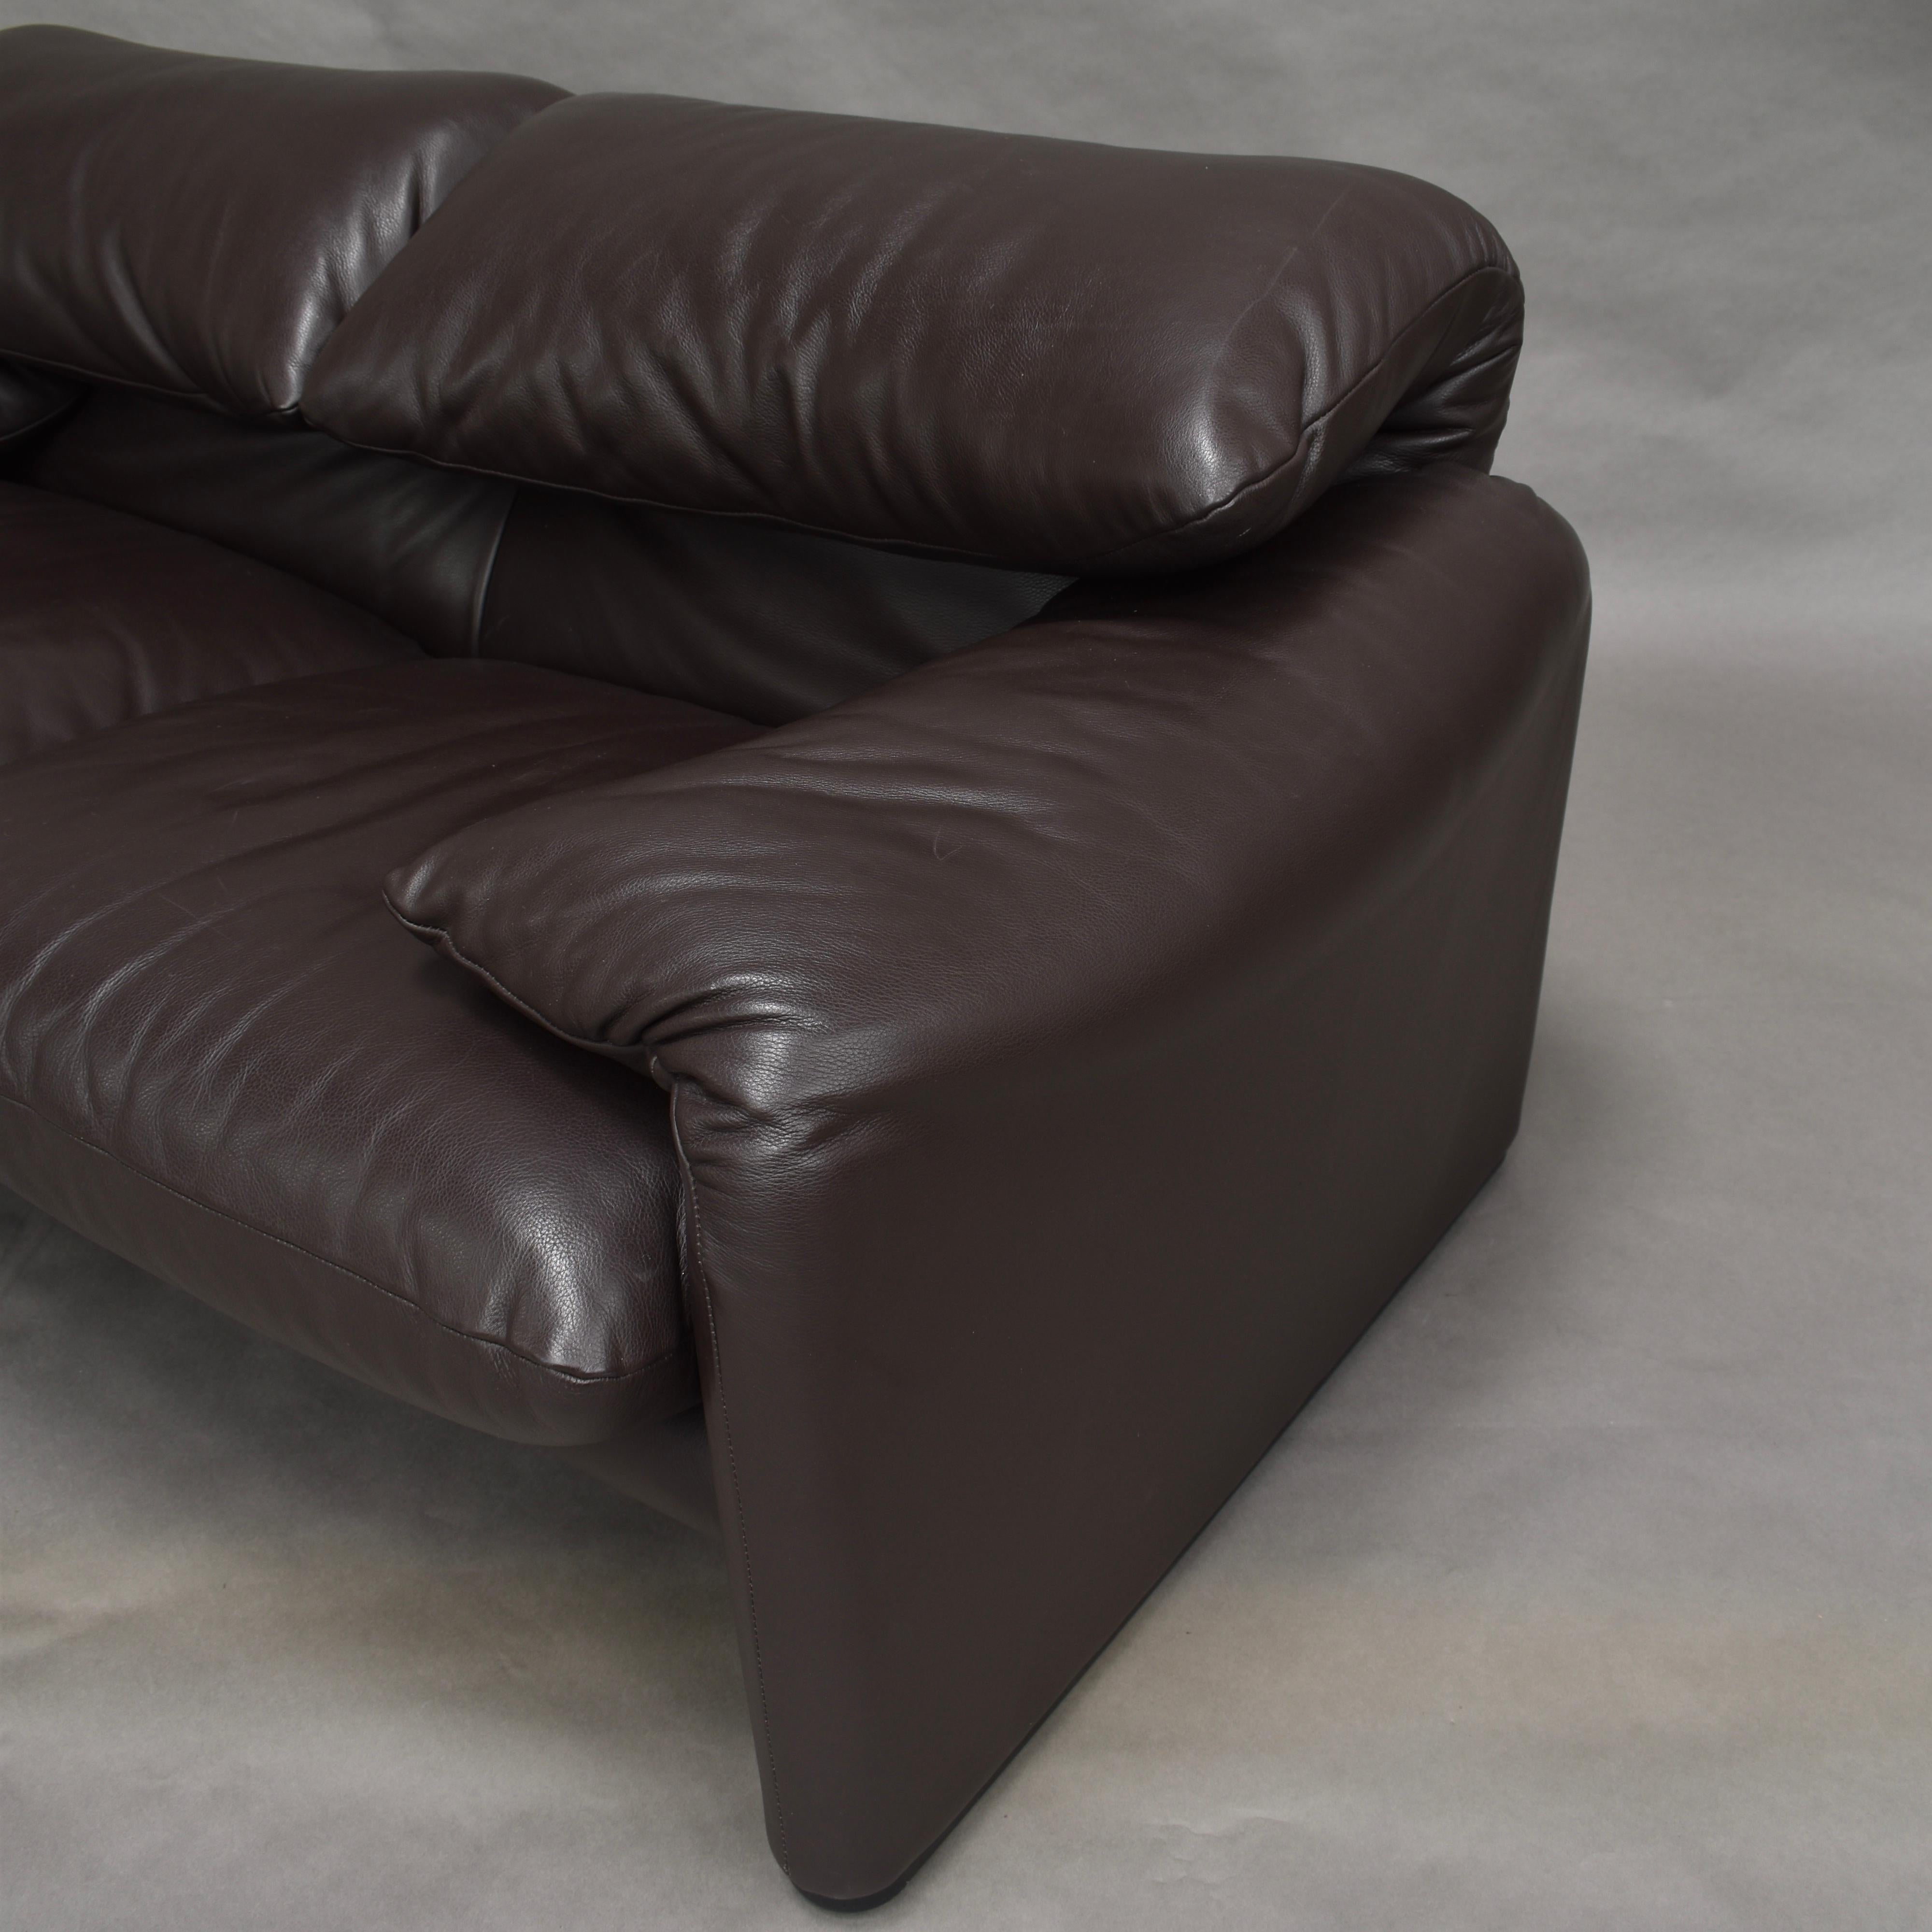 Maralunga Sofa in Brown Leather by Vico Magistratti for Cassina, Italy, 1973 2